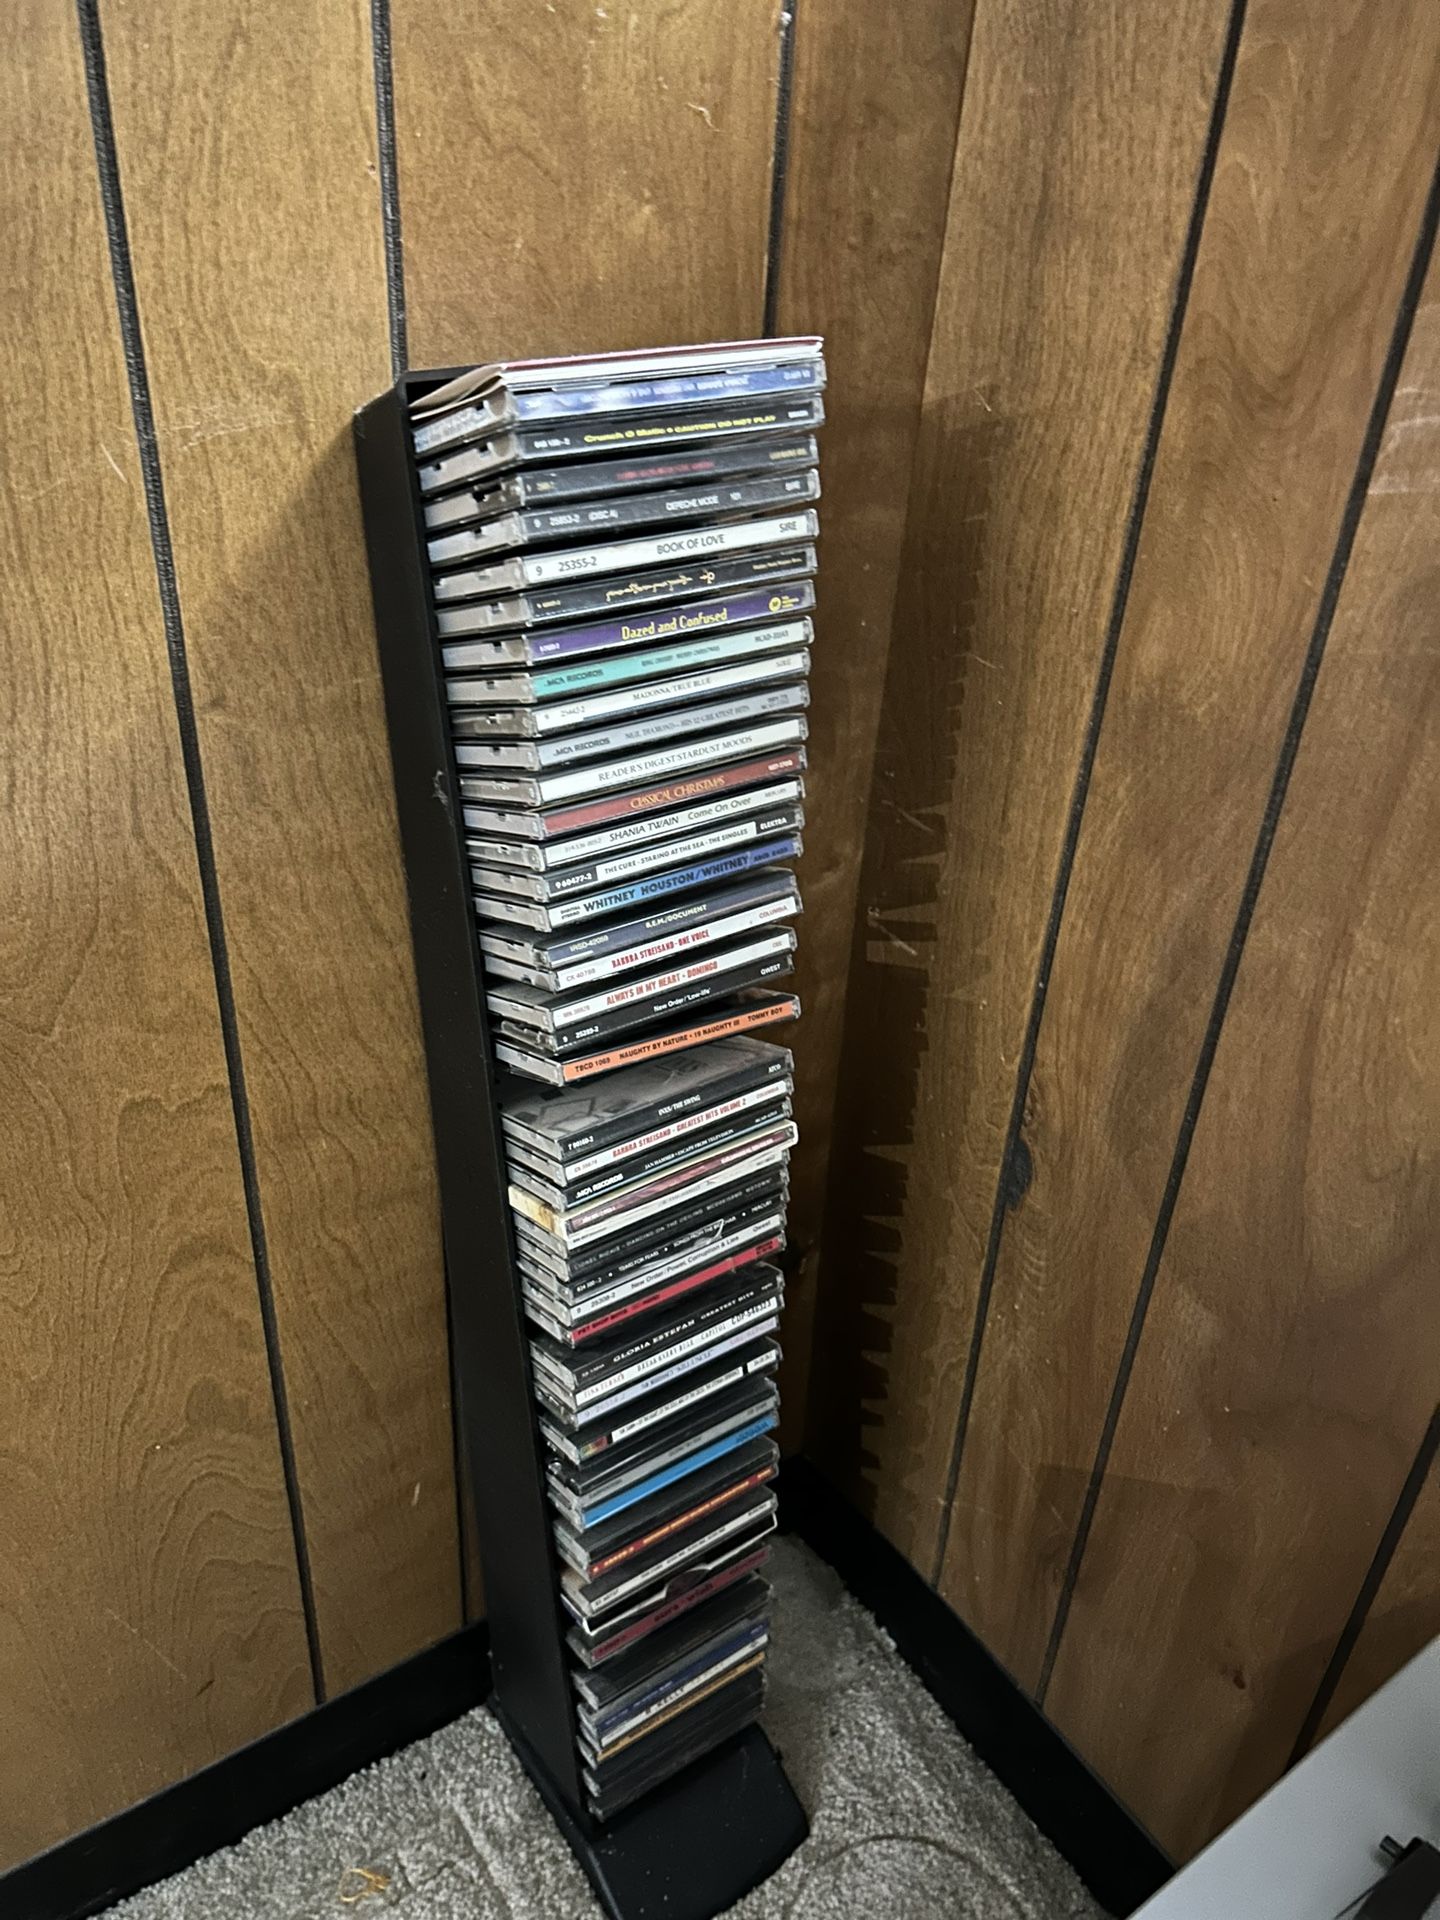 CDs and Display Case / Stand